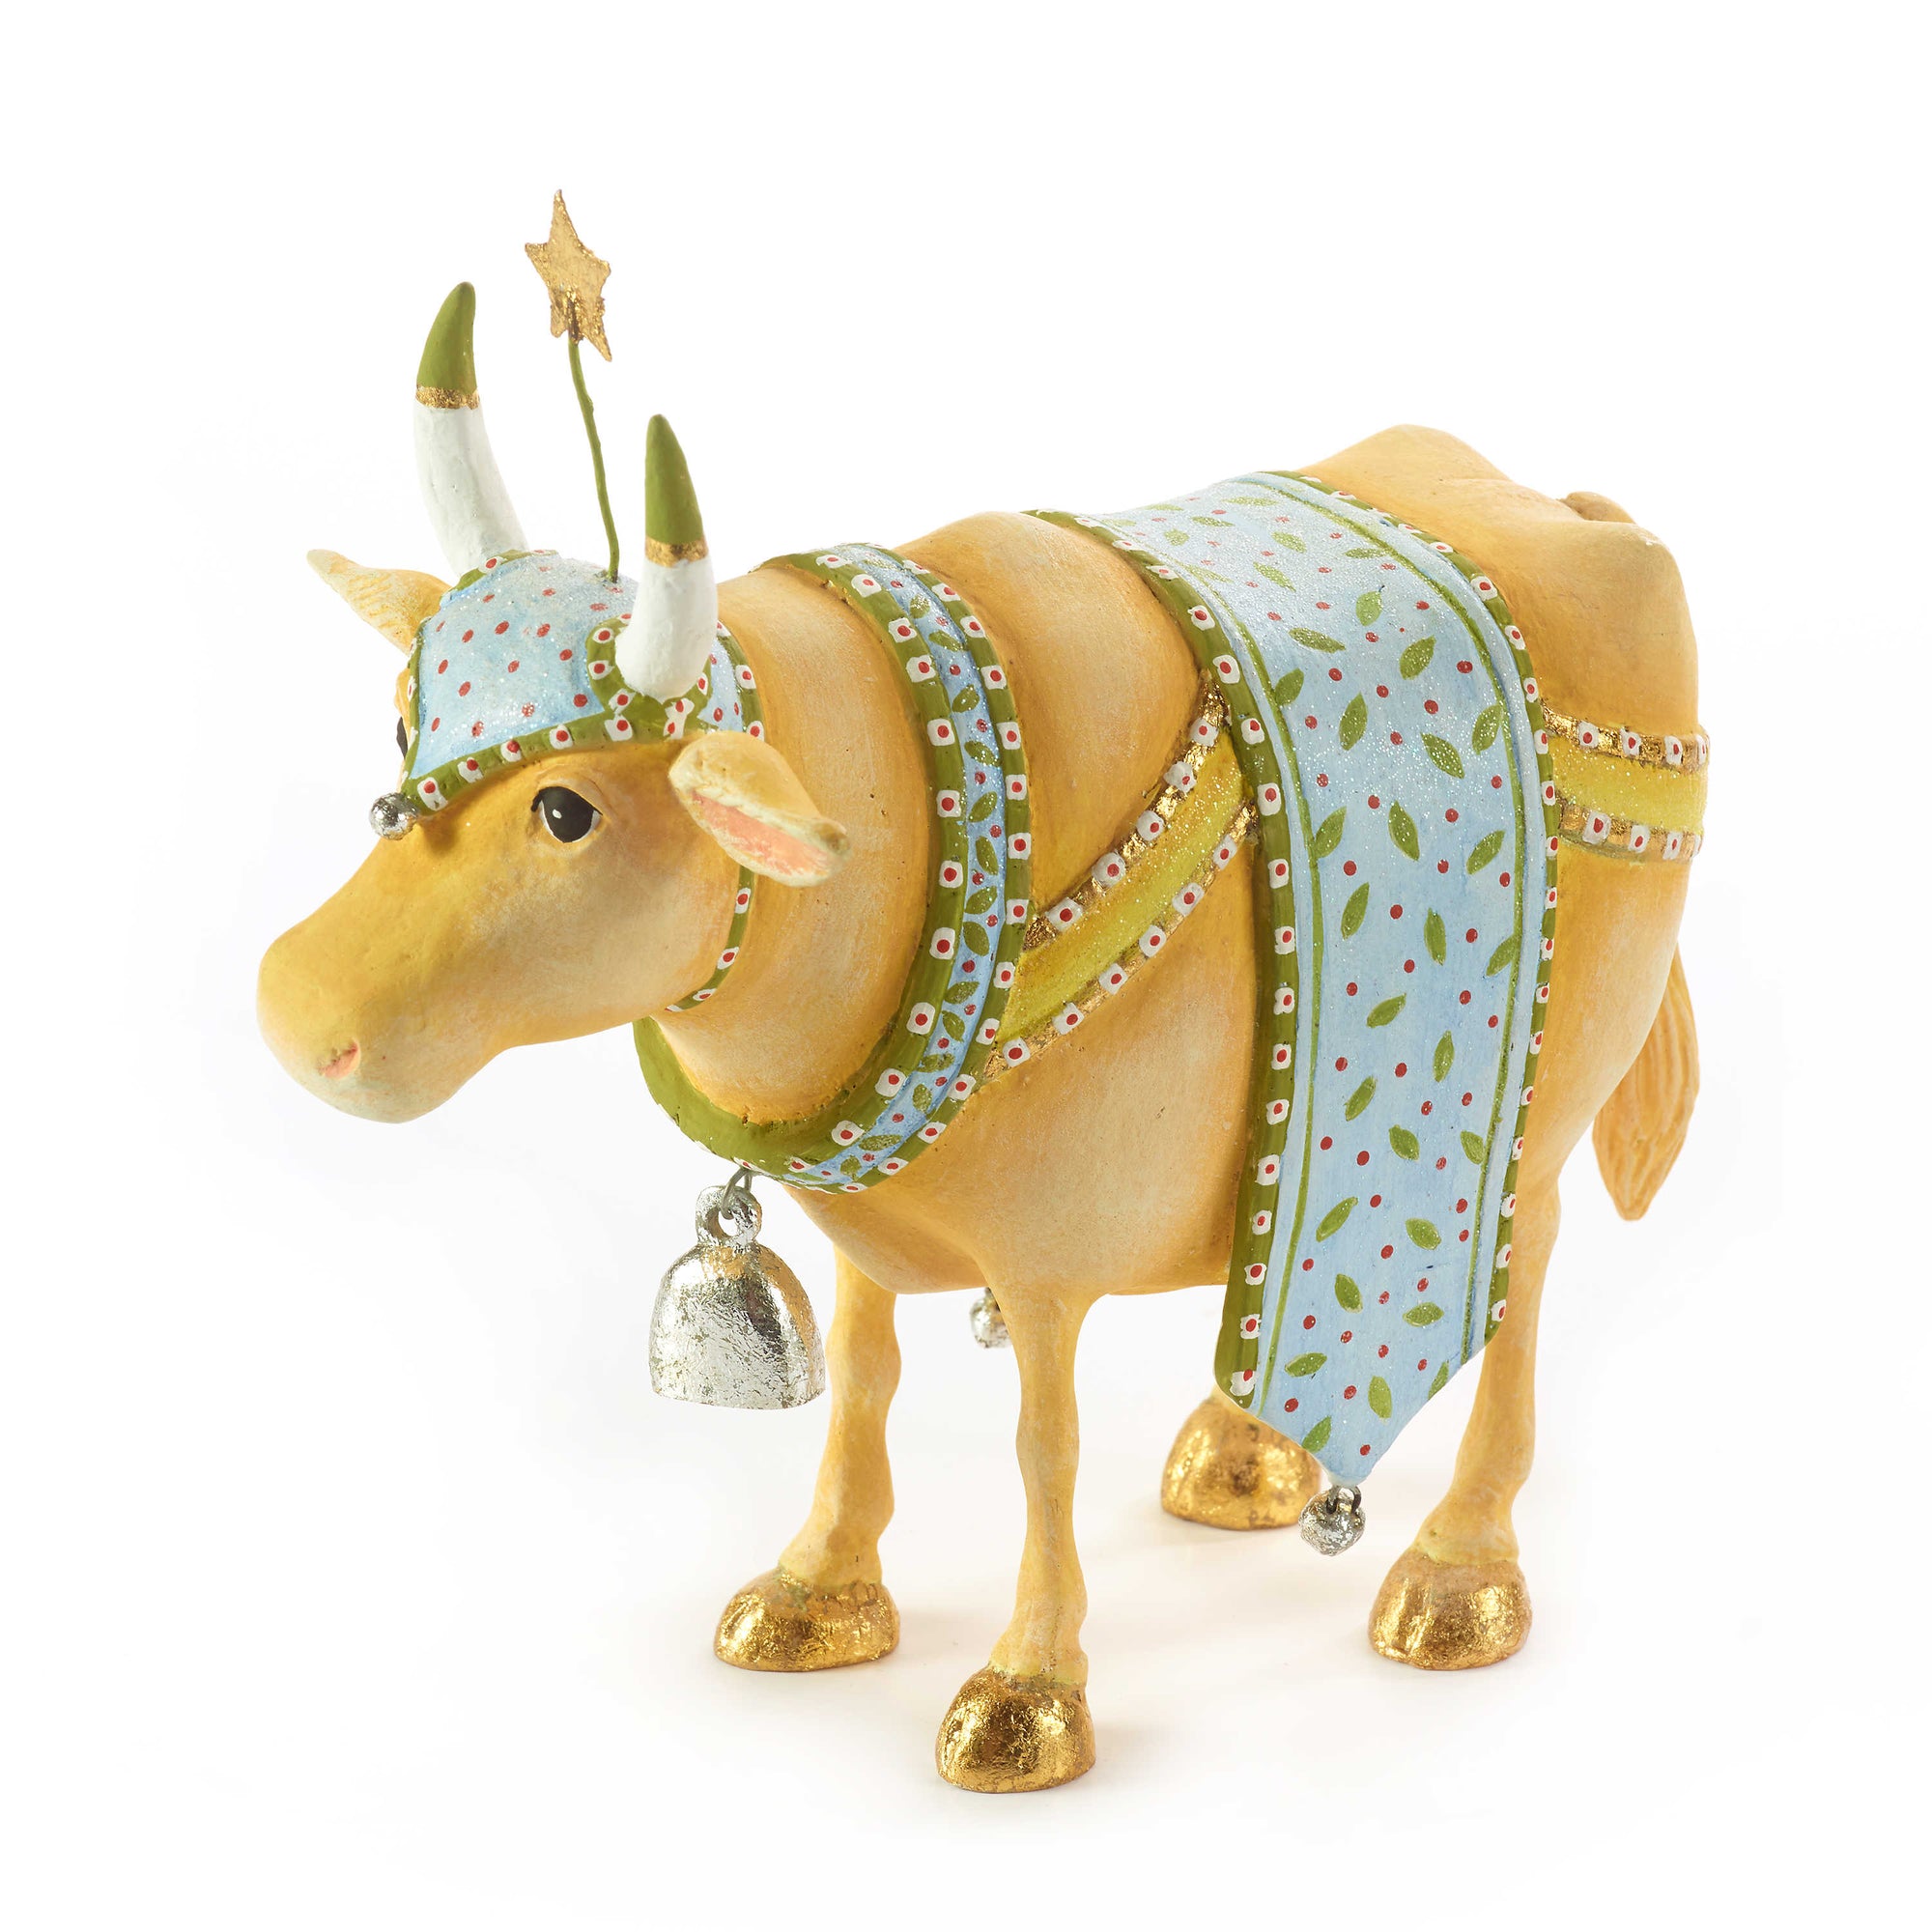 Cow Ornament - My Christmas